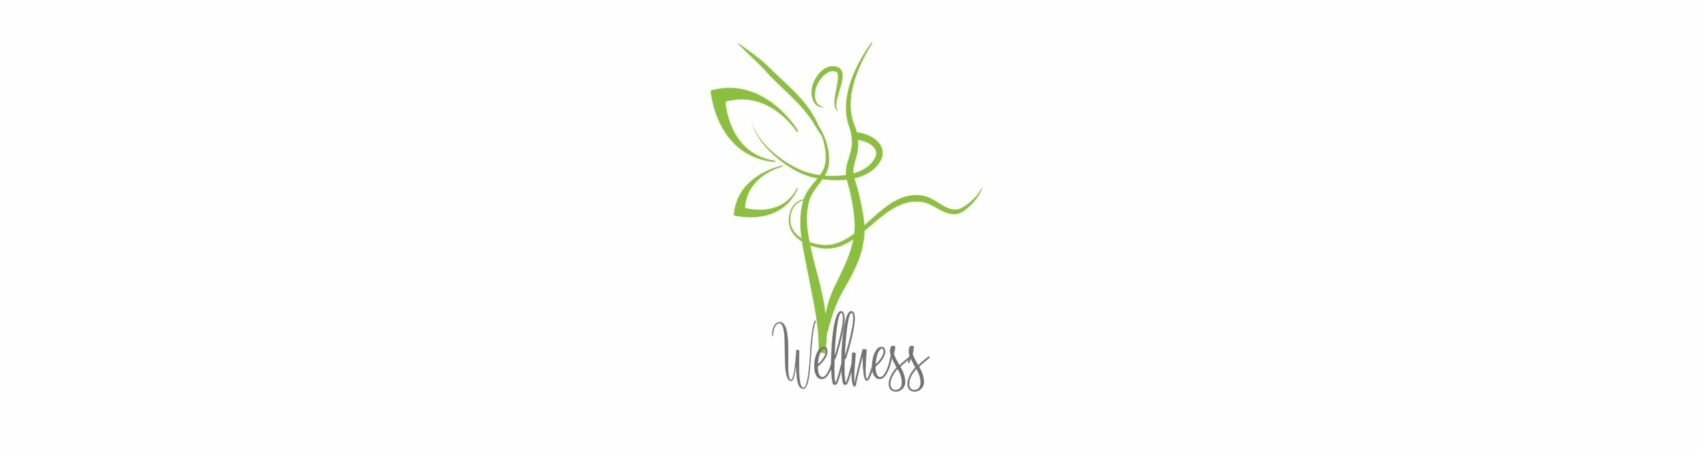 wellness woman with harmony message treatment vector illustration